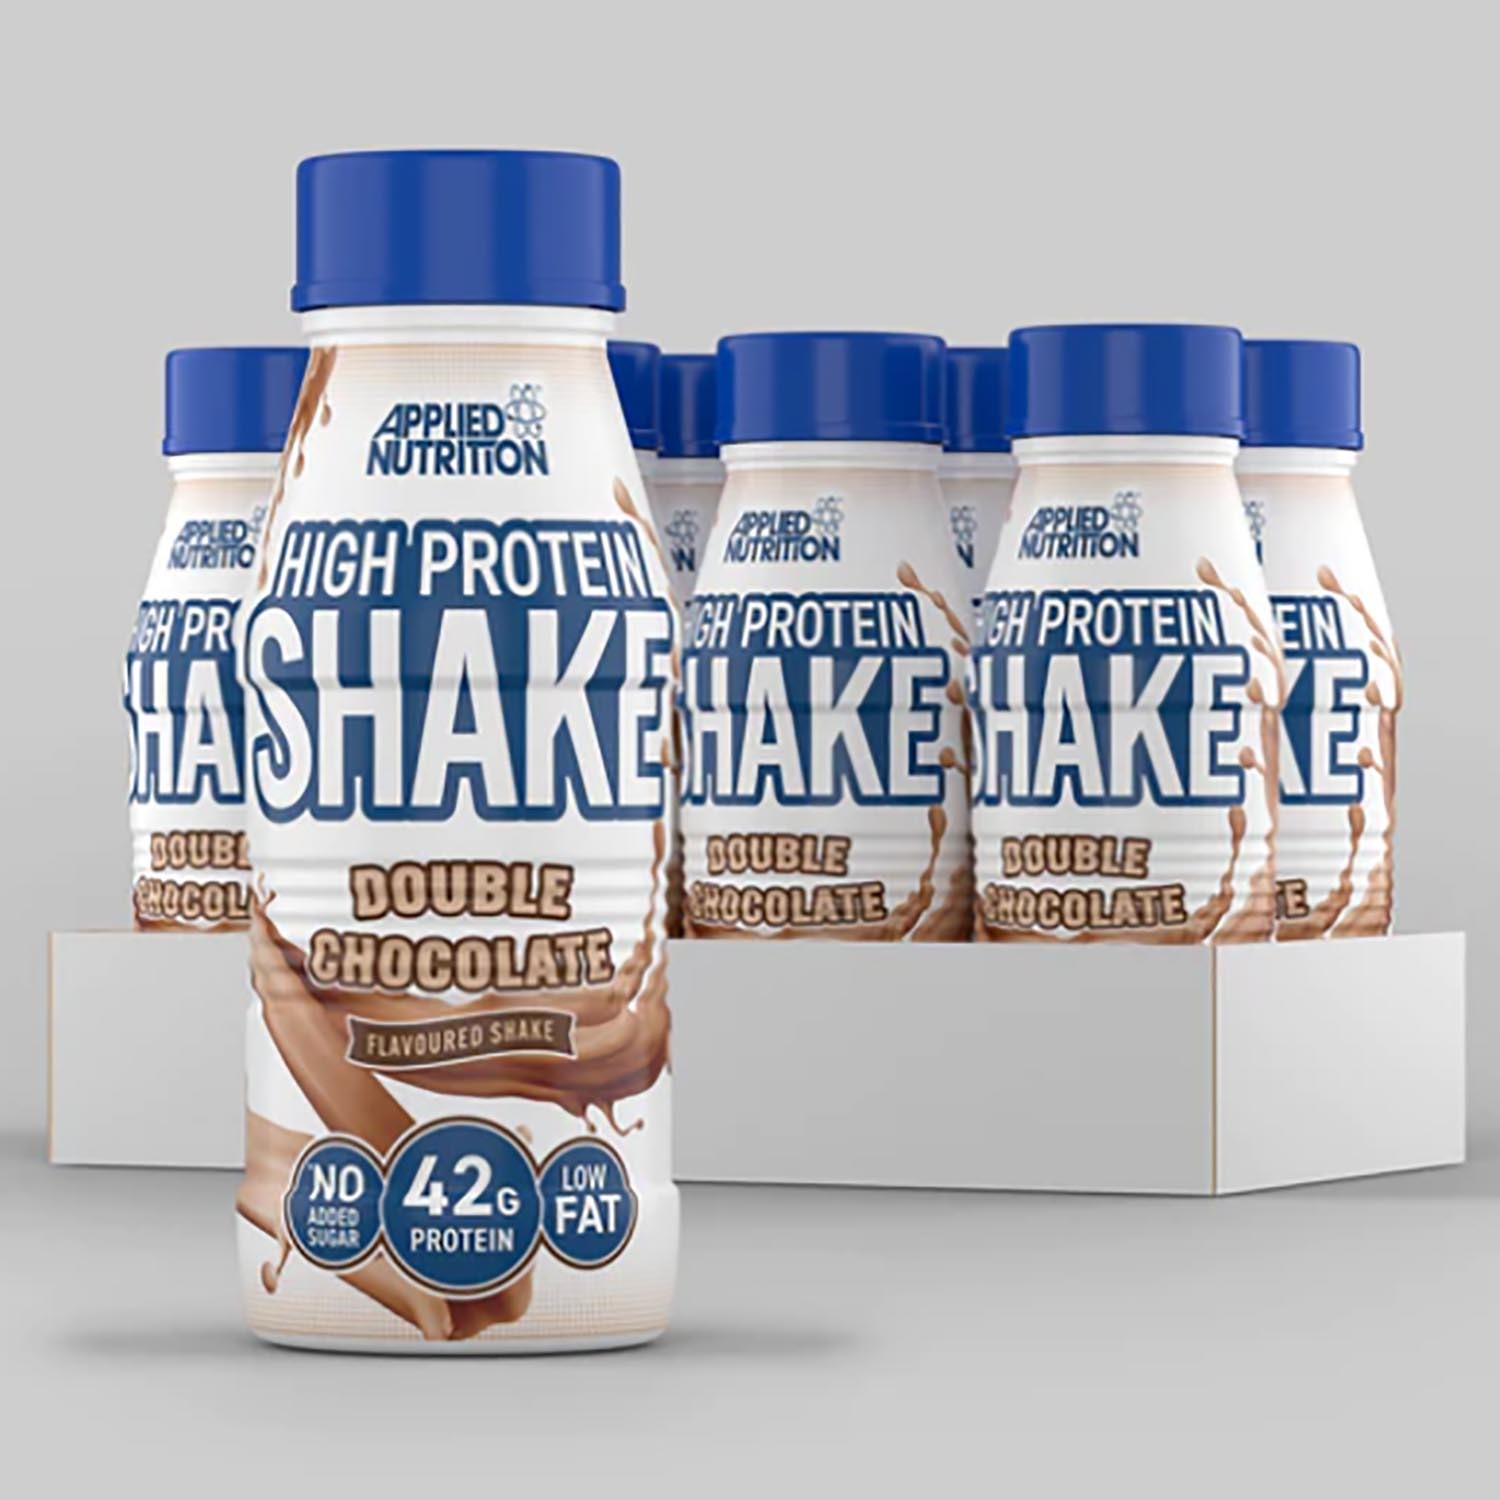 High Protein Double Chocolate Shake Image 2